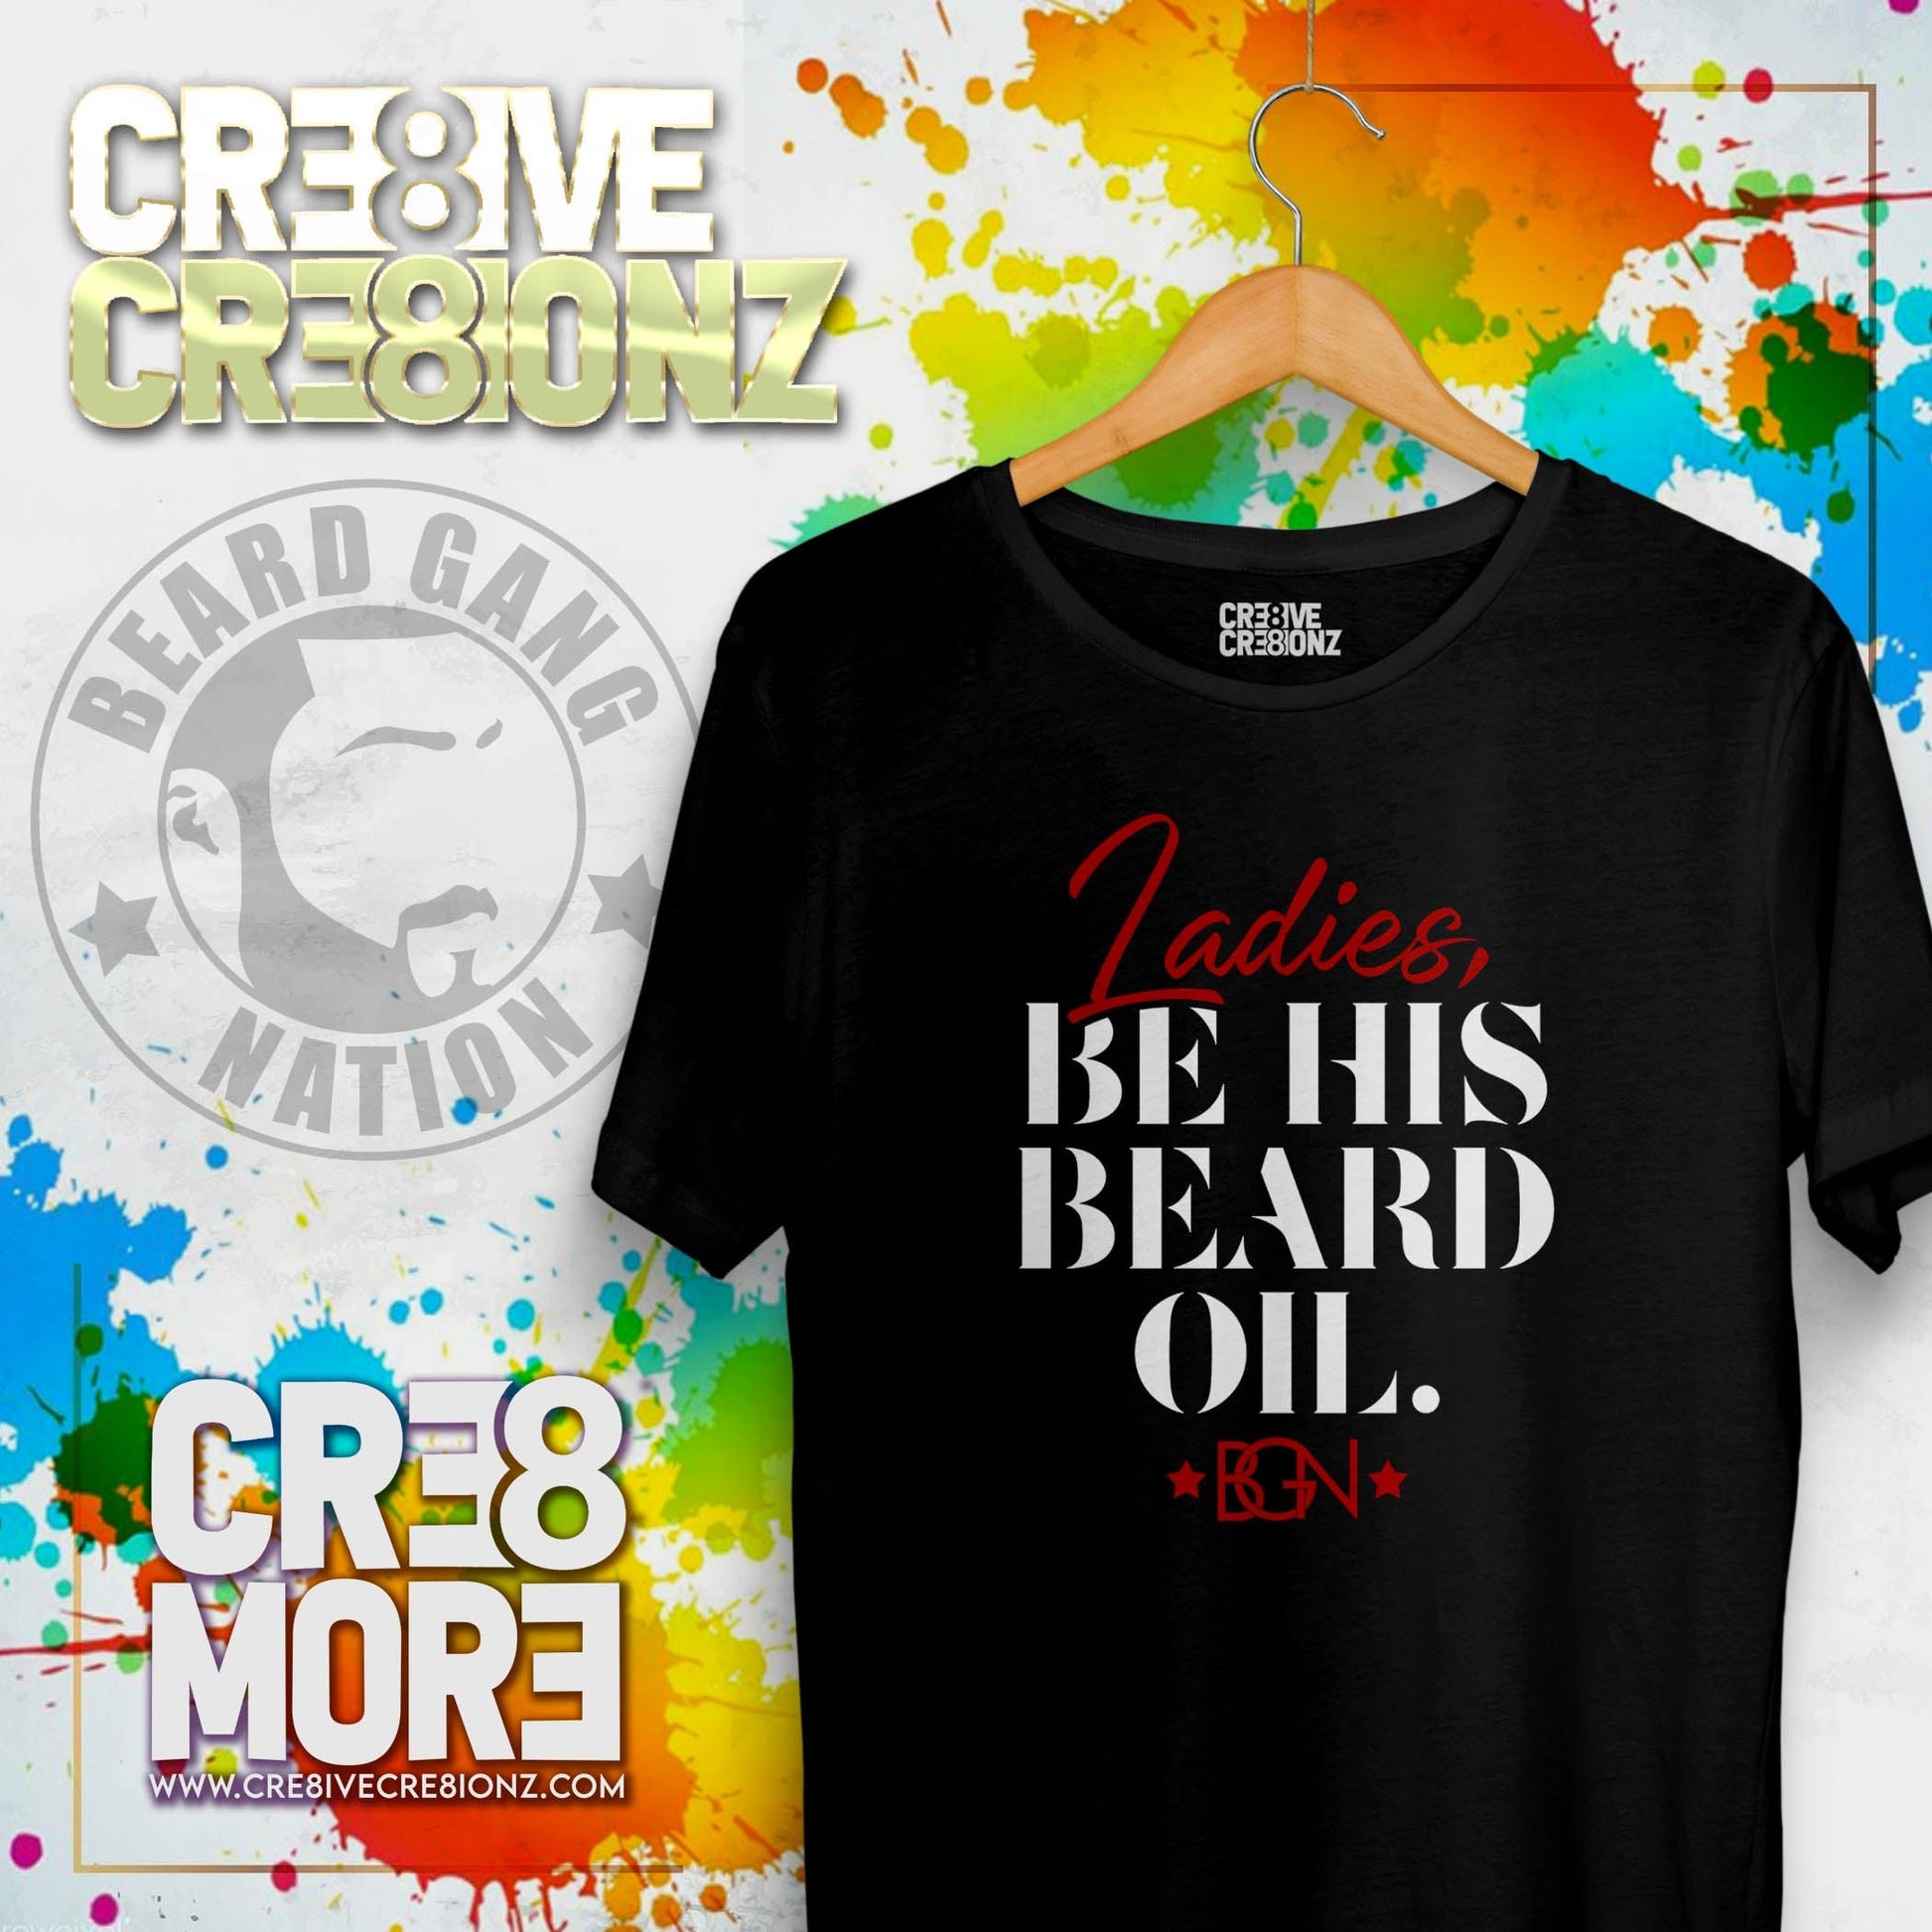 Be His Beard Oil - Cre8ive Cre8ionz